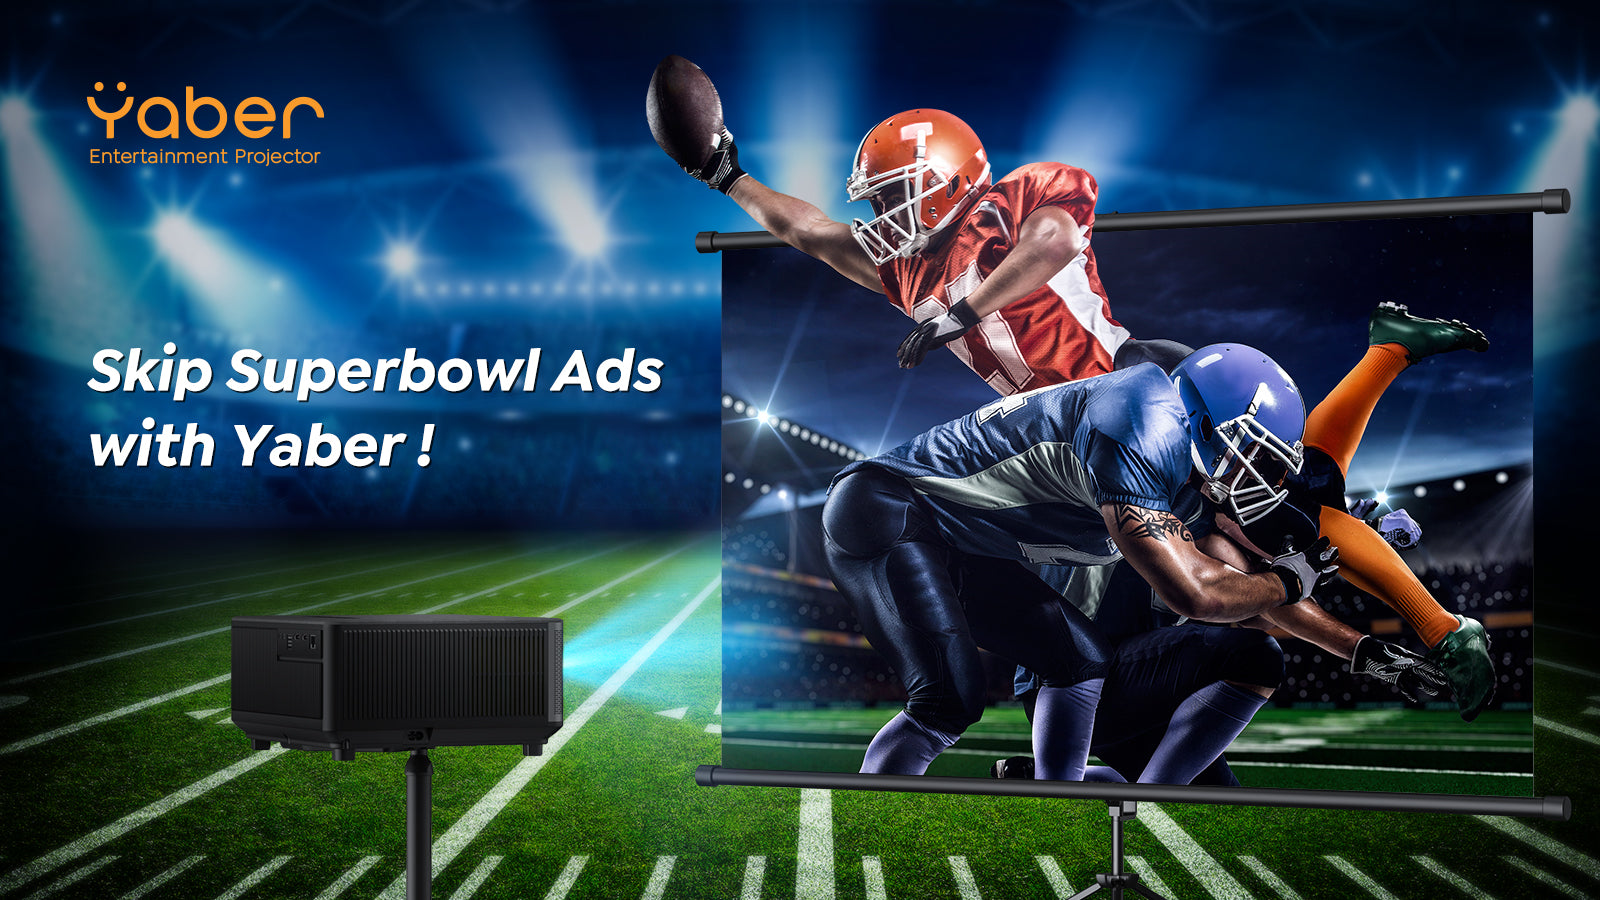 Let's join in our Super Bowl activity to win the prize!